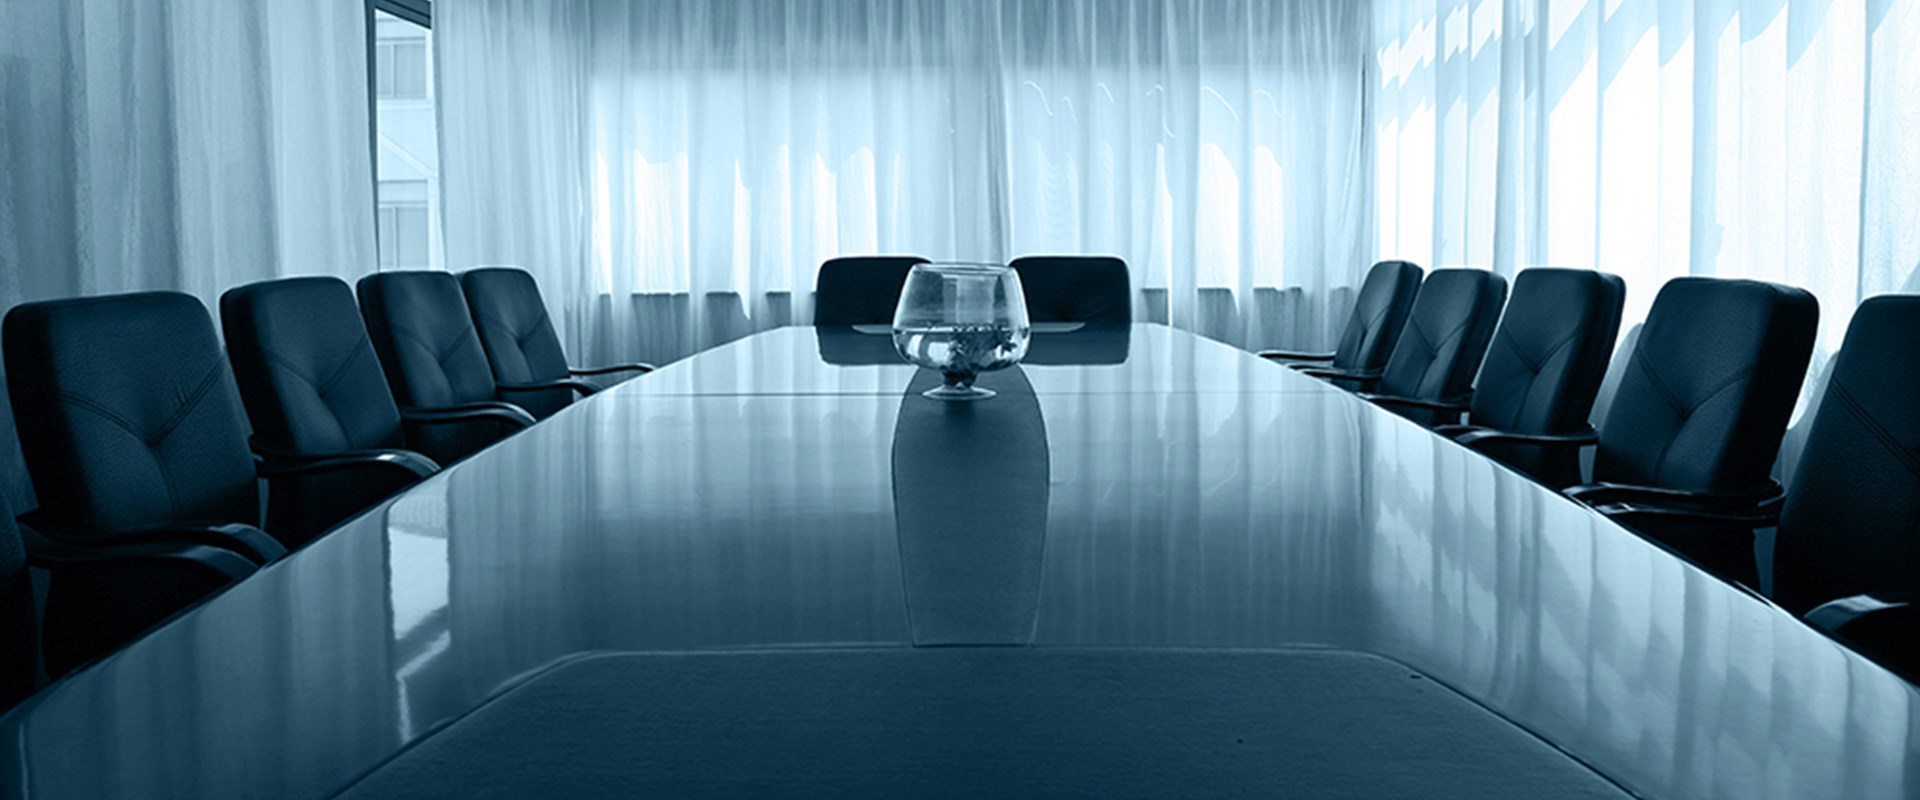 Image of a meeting room or or board room